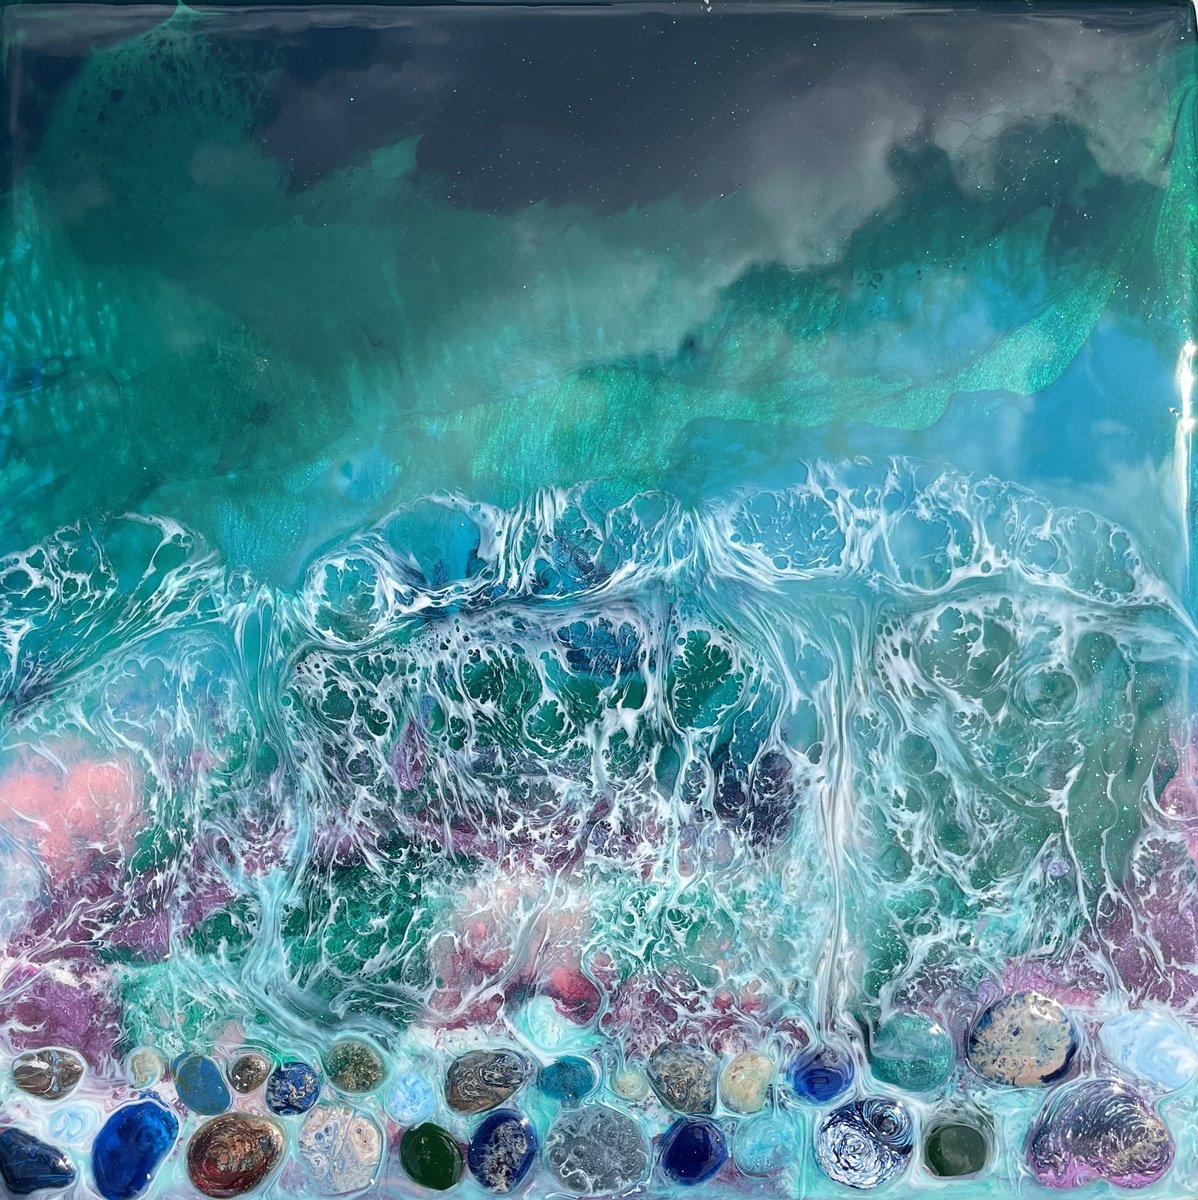 Teal and Purple Ocean Splashes on Pebbles by Hannah Bruce